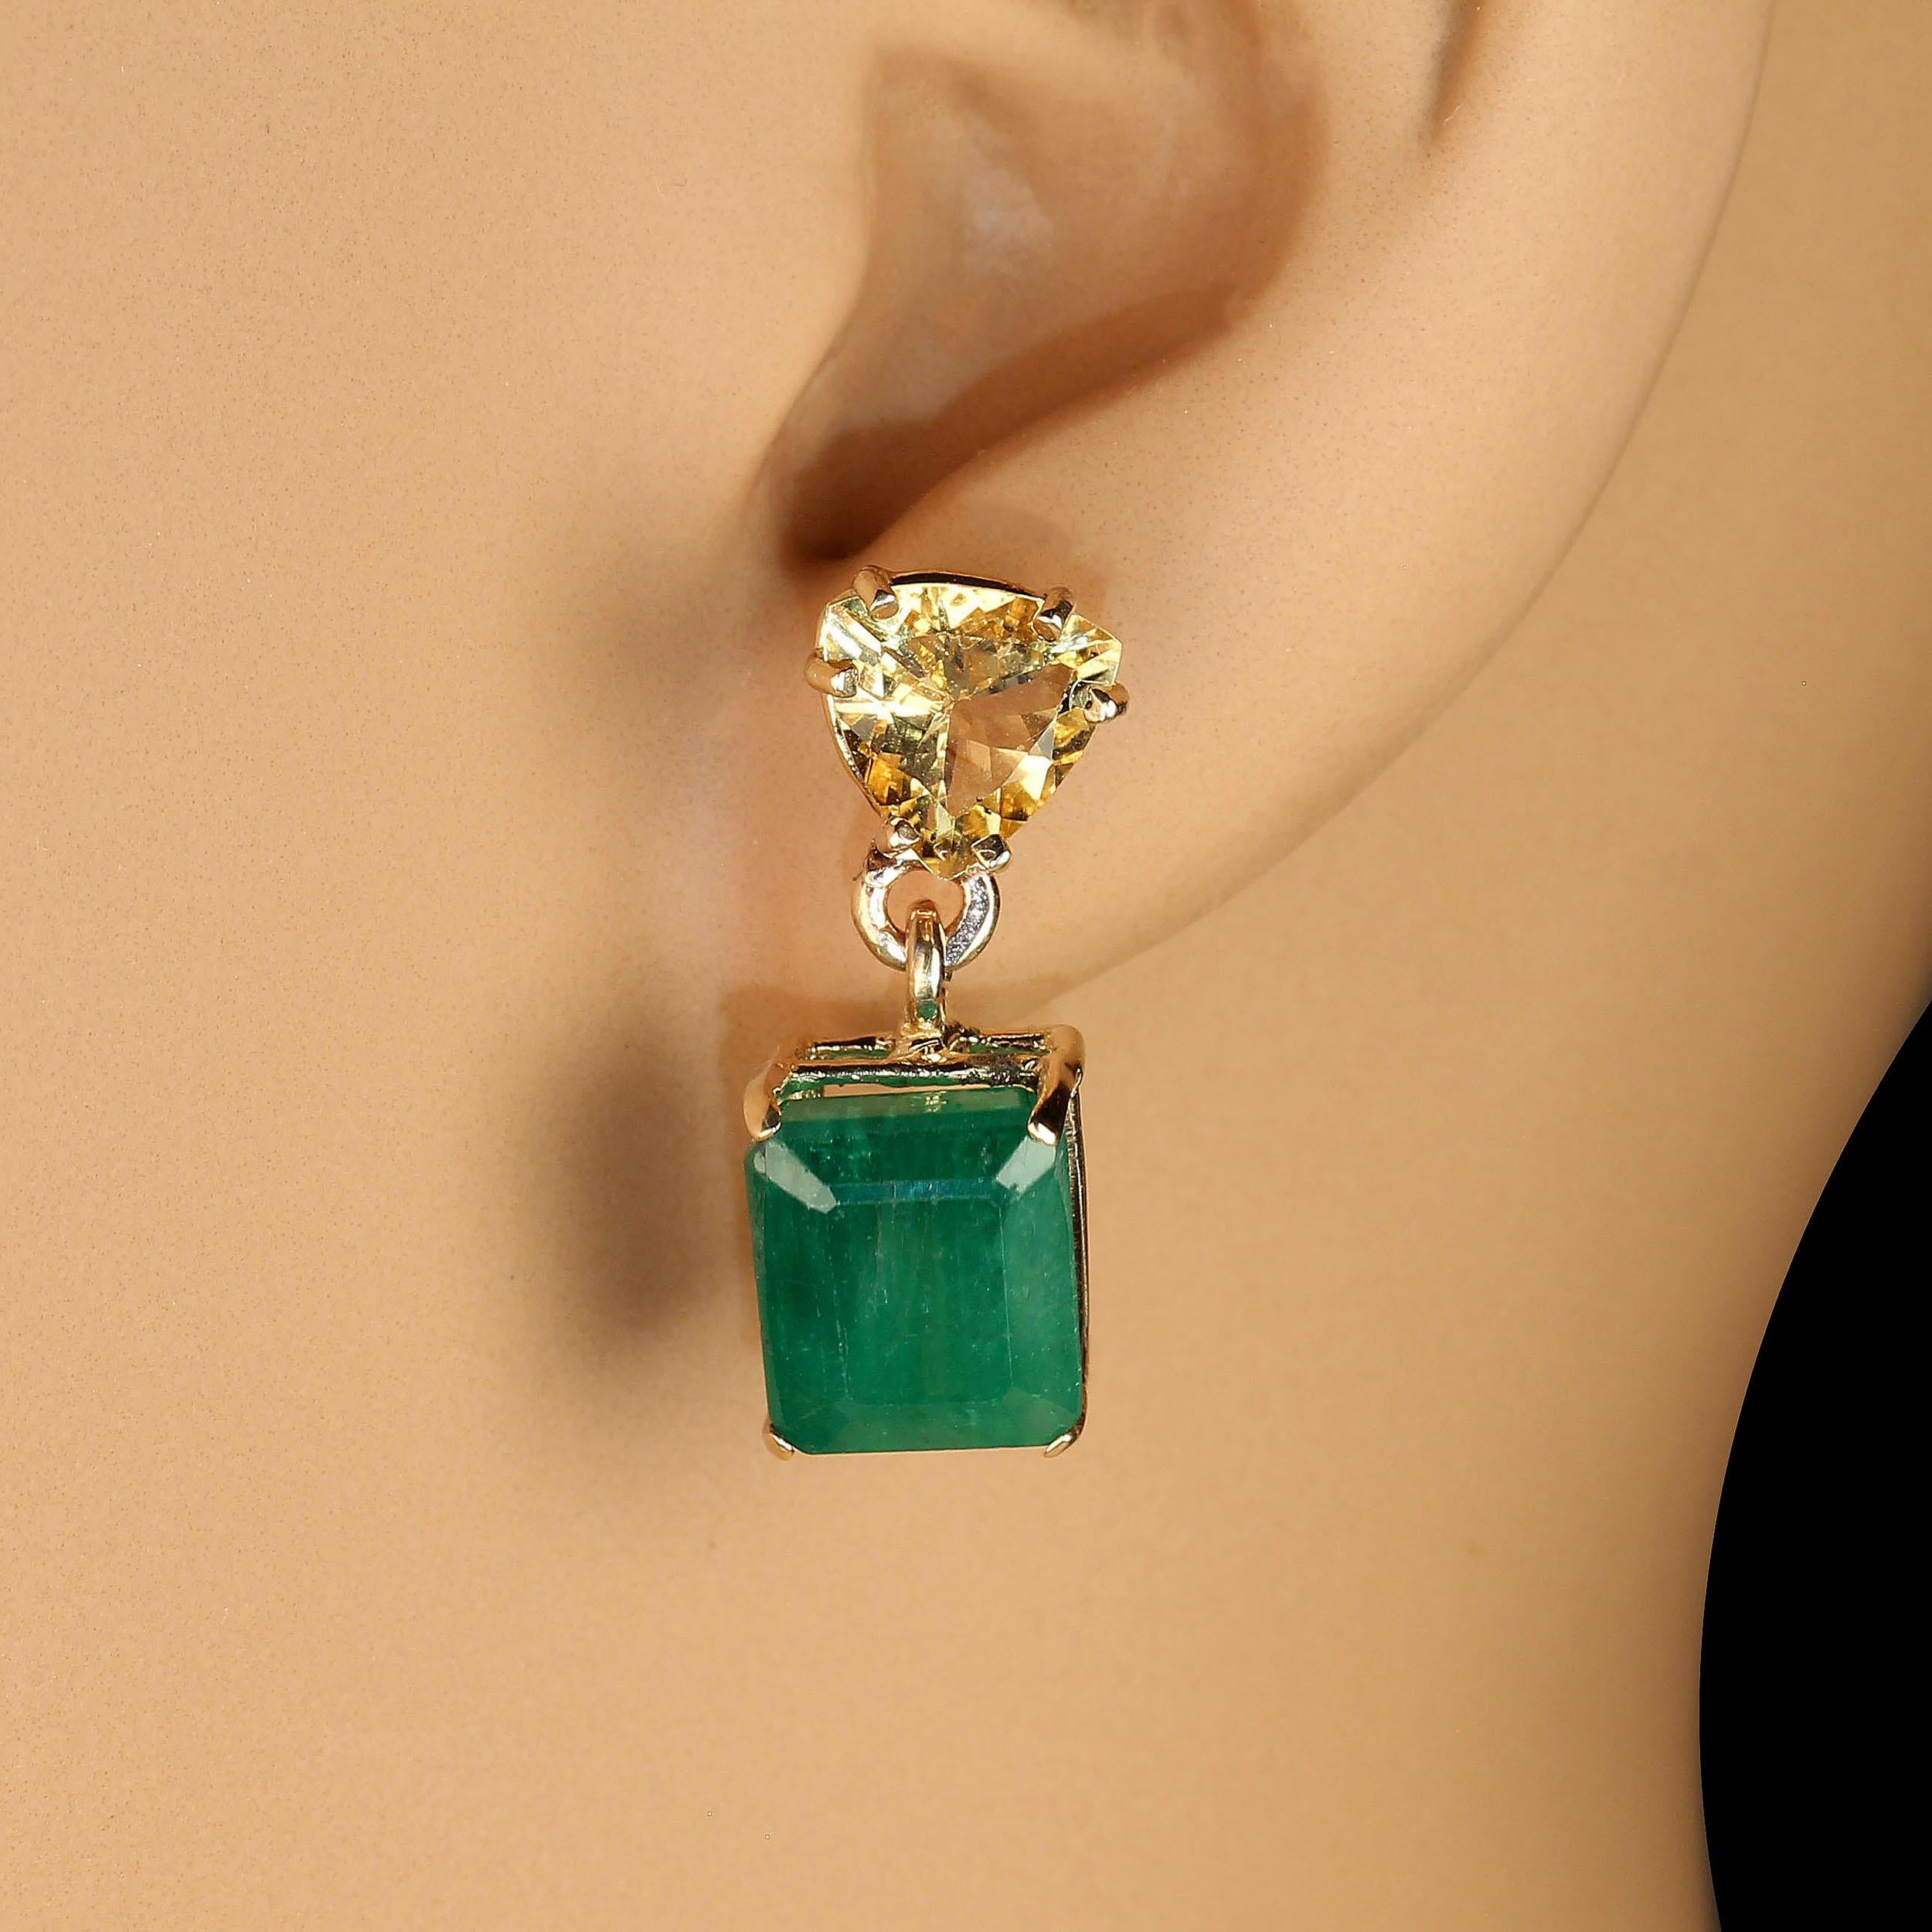 Another pair of unique earrings from the Aria Collection. 10 Carats of green, green Emeralds dangling from sparkling gold, gold golden Beryls make these earrings a 'must have' for your earring collection. These very green Emeralds are almost square